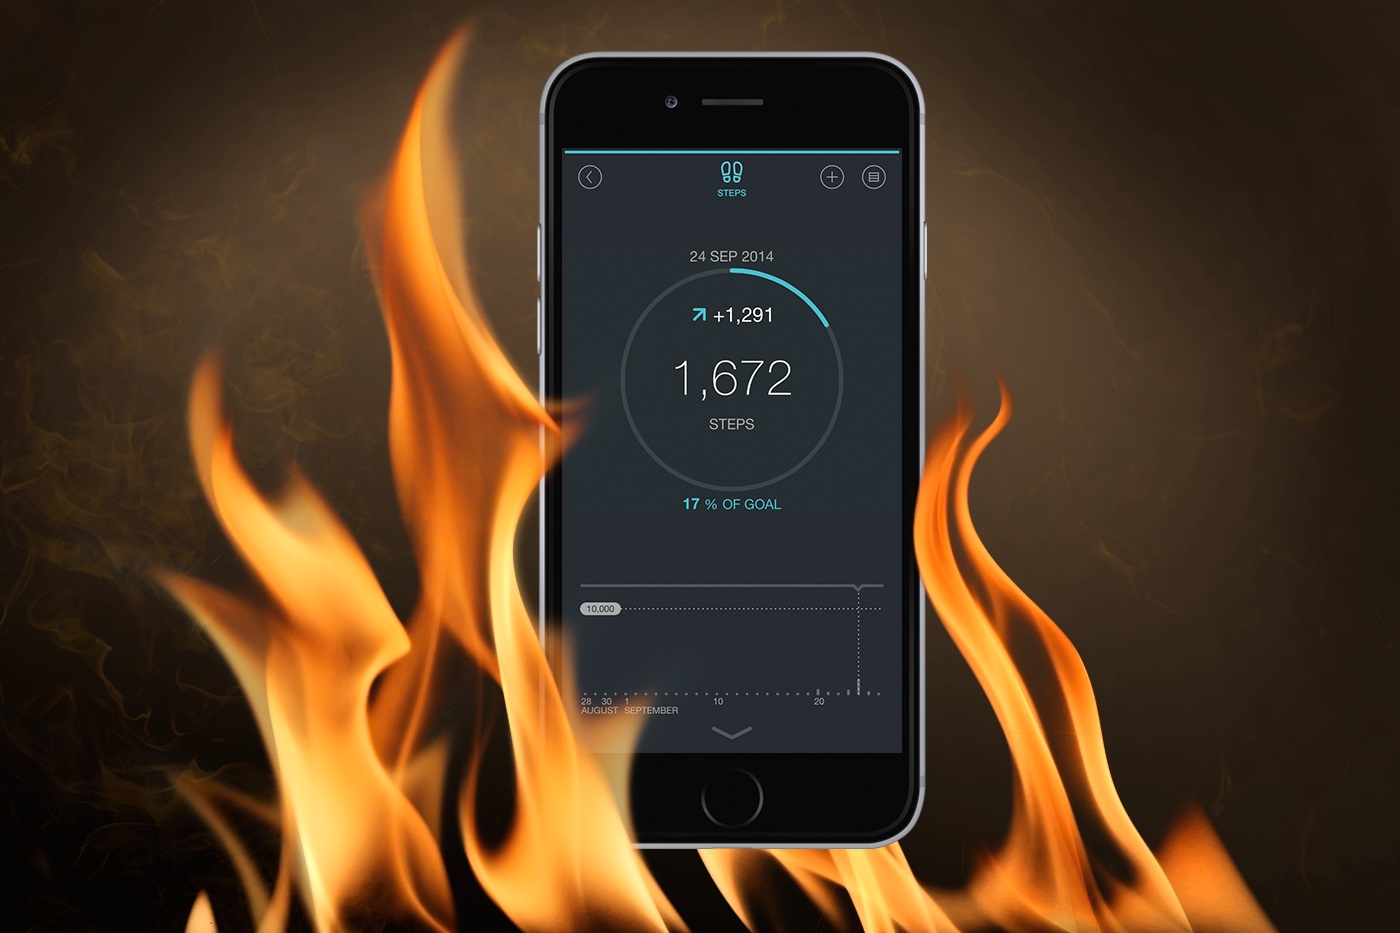 What is causing your smartphone to overheat?